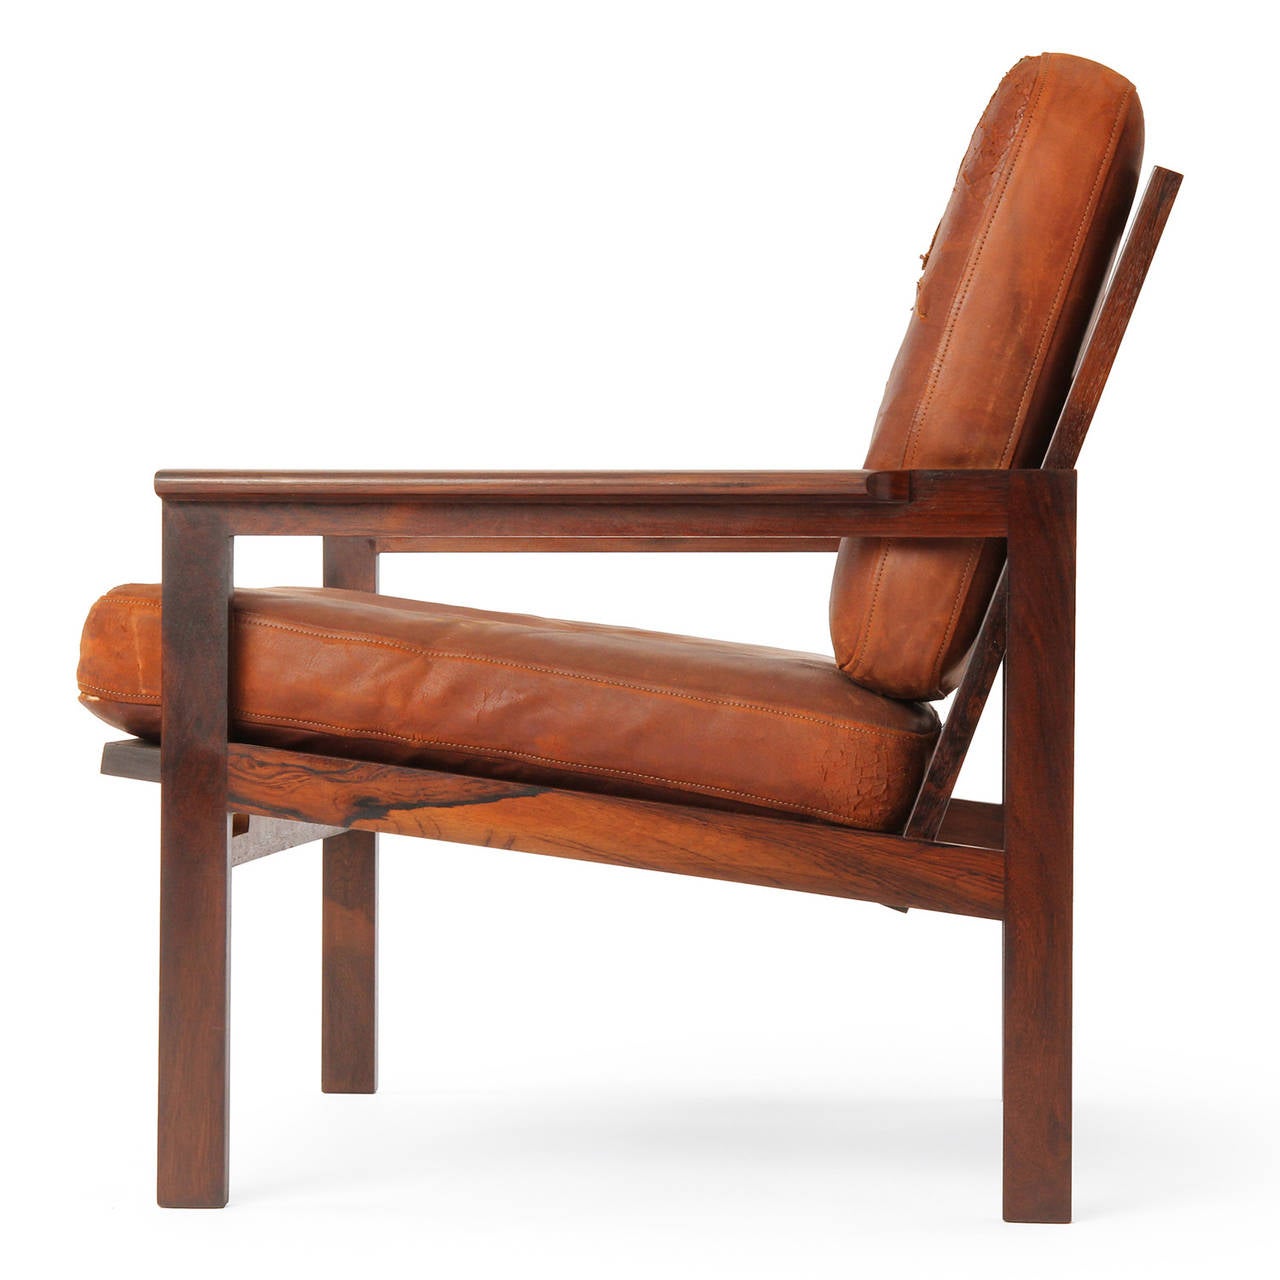 A rectilinear Scandinavian Modern armchair designed by Illum Wikkelso featuring an exposed solid rosewood frame, wide flattened arms, and loose natural leather cushions with a beautiful patina. Manufactured by cabinetmaker Neils Eilersen in Denmark.